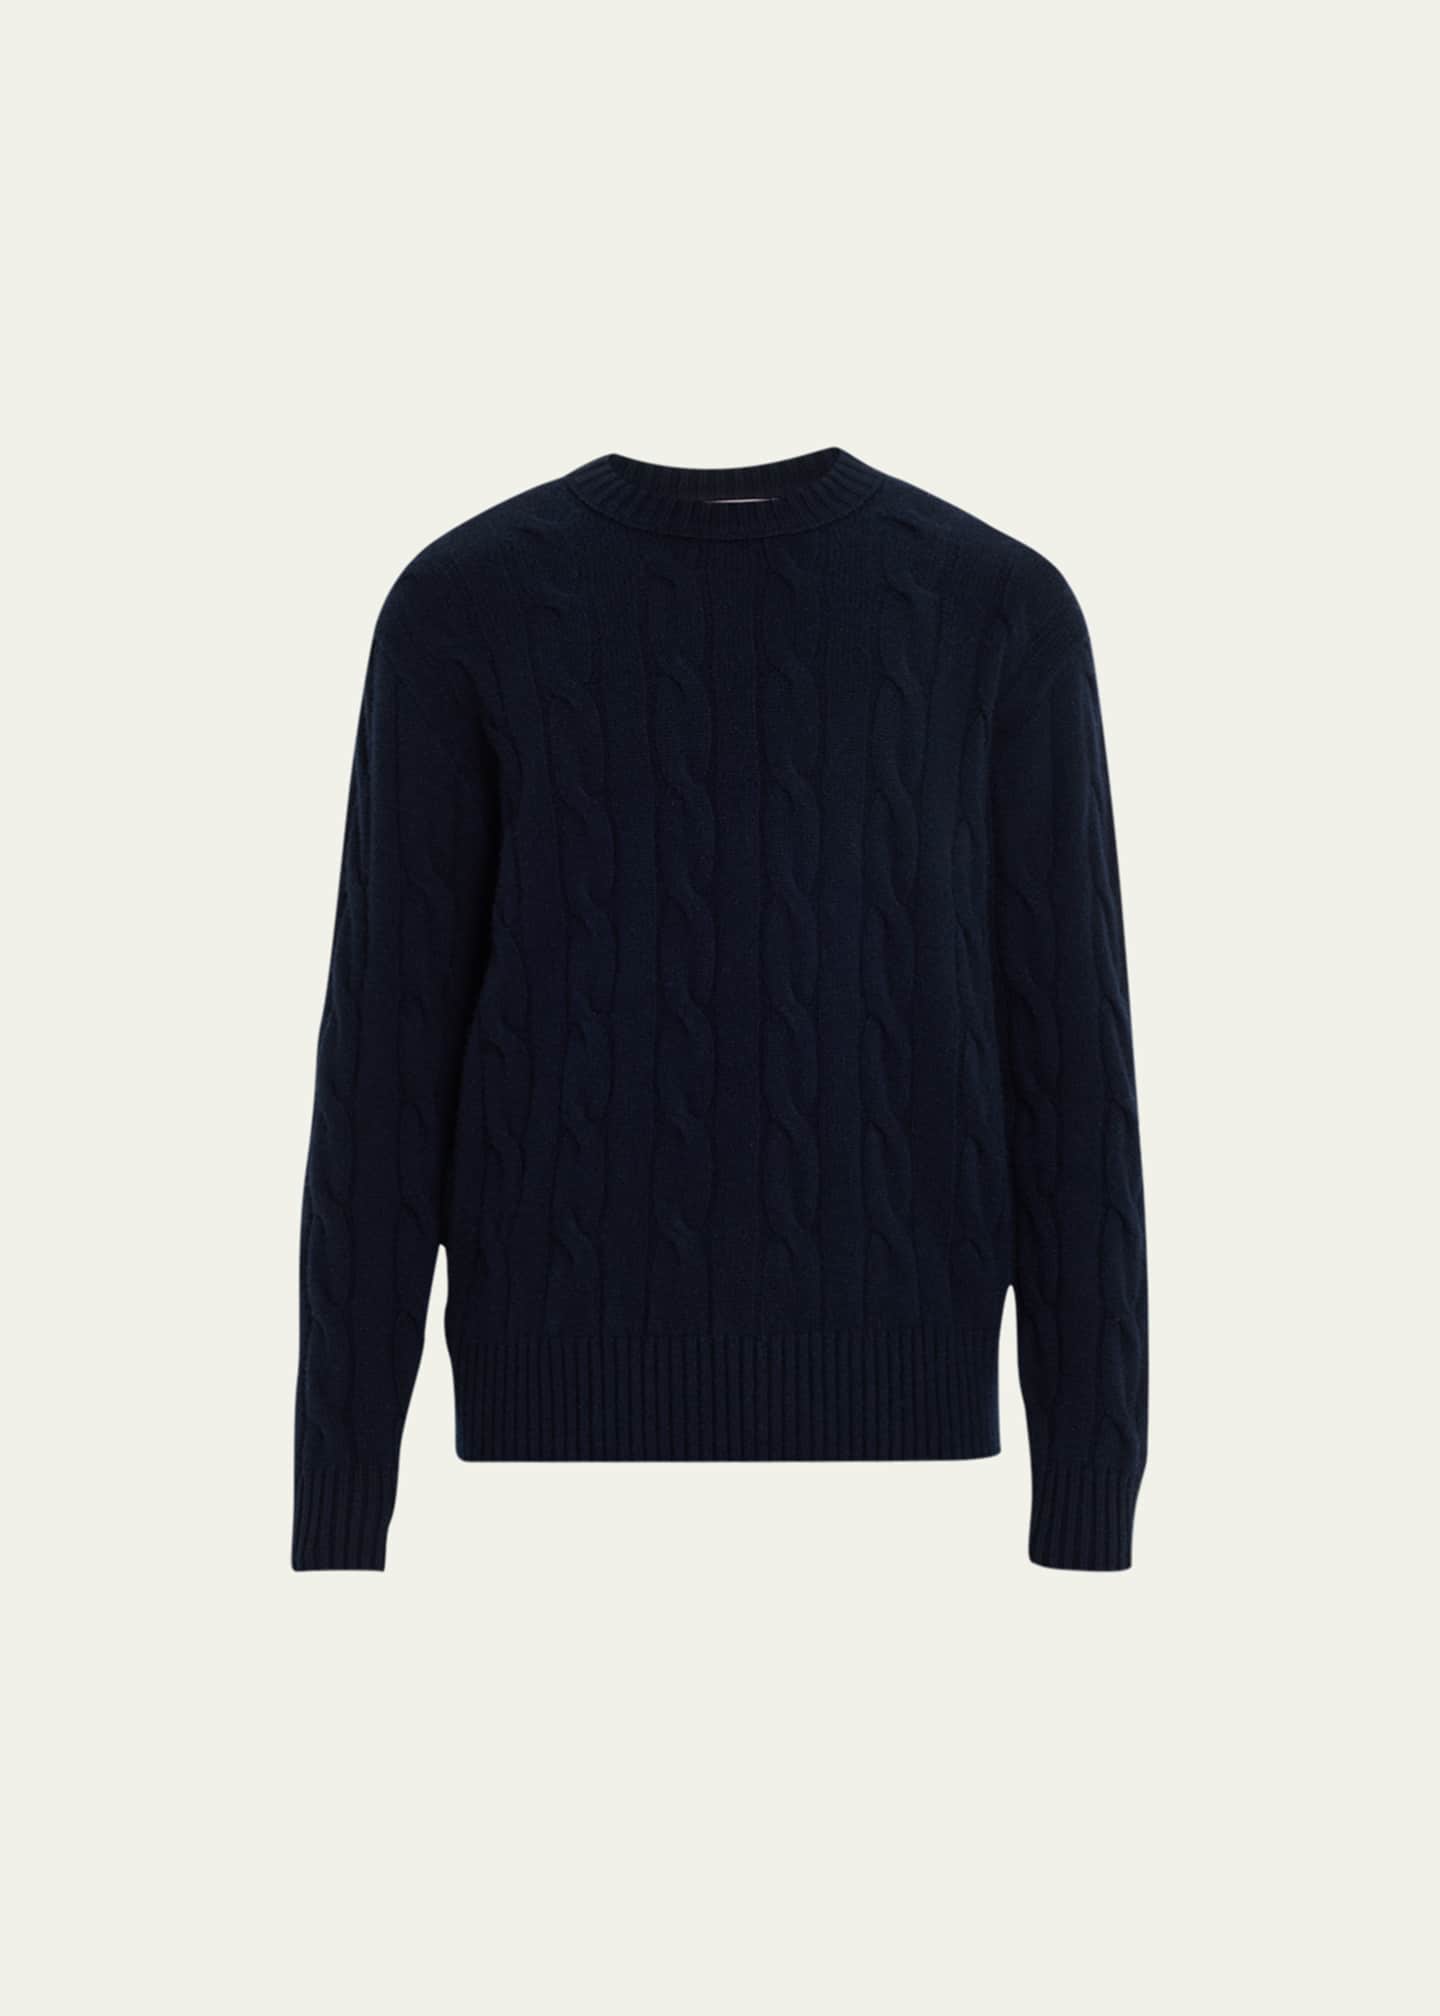 FRAME Men's Cashmere Cable-Knit Sweater - Bergdorf Goodman